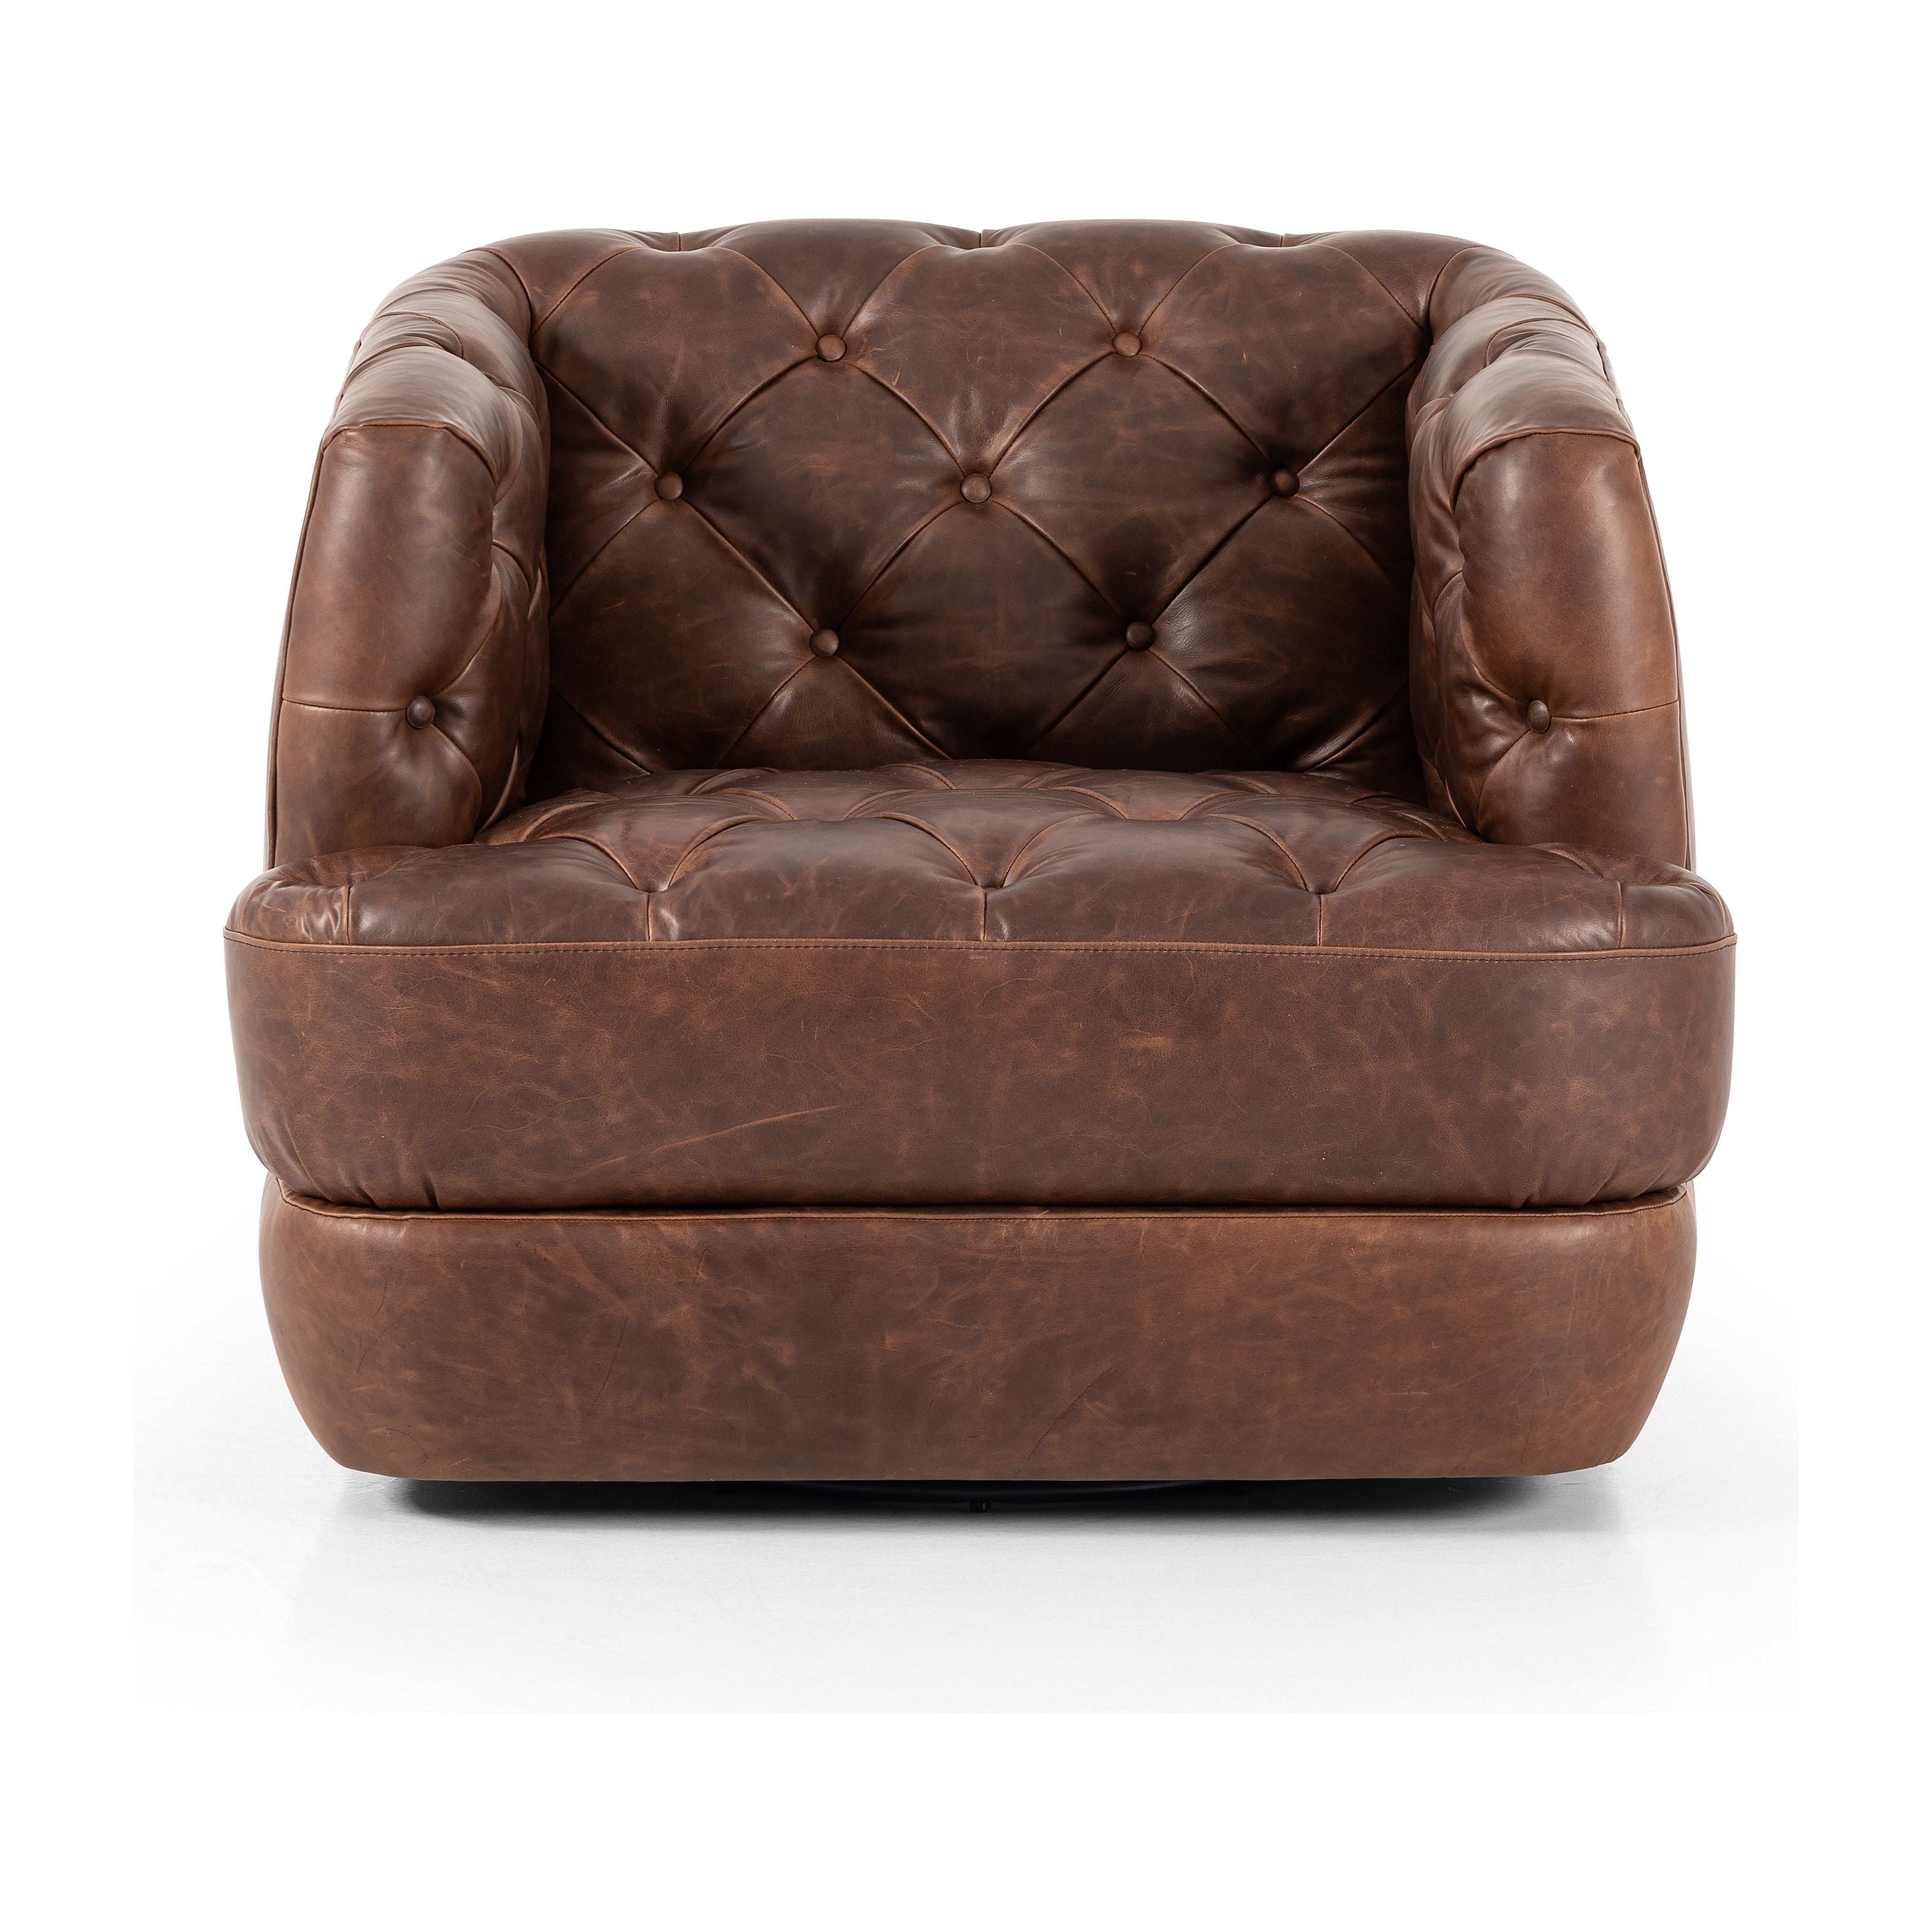 Old English-inspired top-grain leather is finished with a soft hand for a vintage, lived-in look on this traditionally inspired chair. Handcrafted in Italy, the richness of this distinctive, full-bodied leather develops an even-richer patina over time. Button tufting texturizes a comfortably curved back and sides, while a 360-degree swivel modernizes the whole look. Amethyst Home provides interior design, new construction, custom furniture, and area rugs in the Portland metro area.